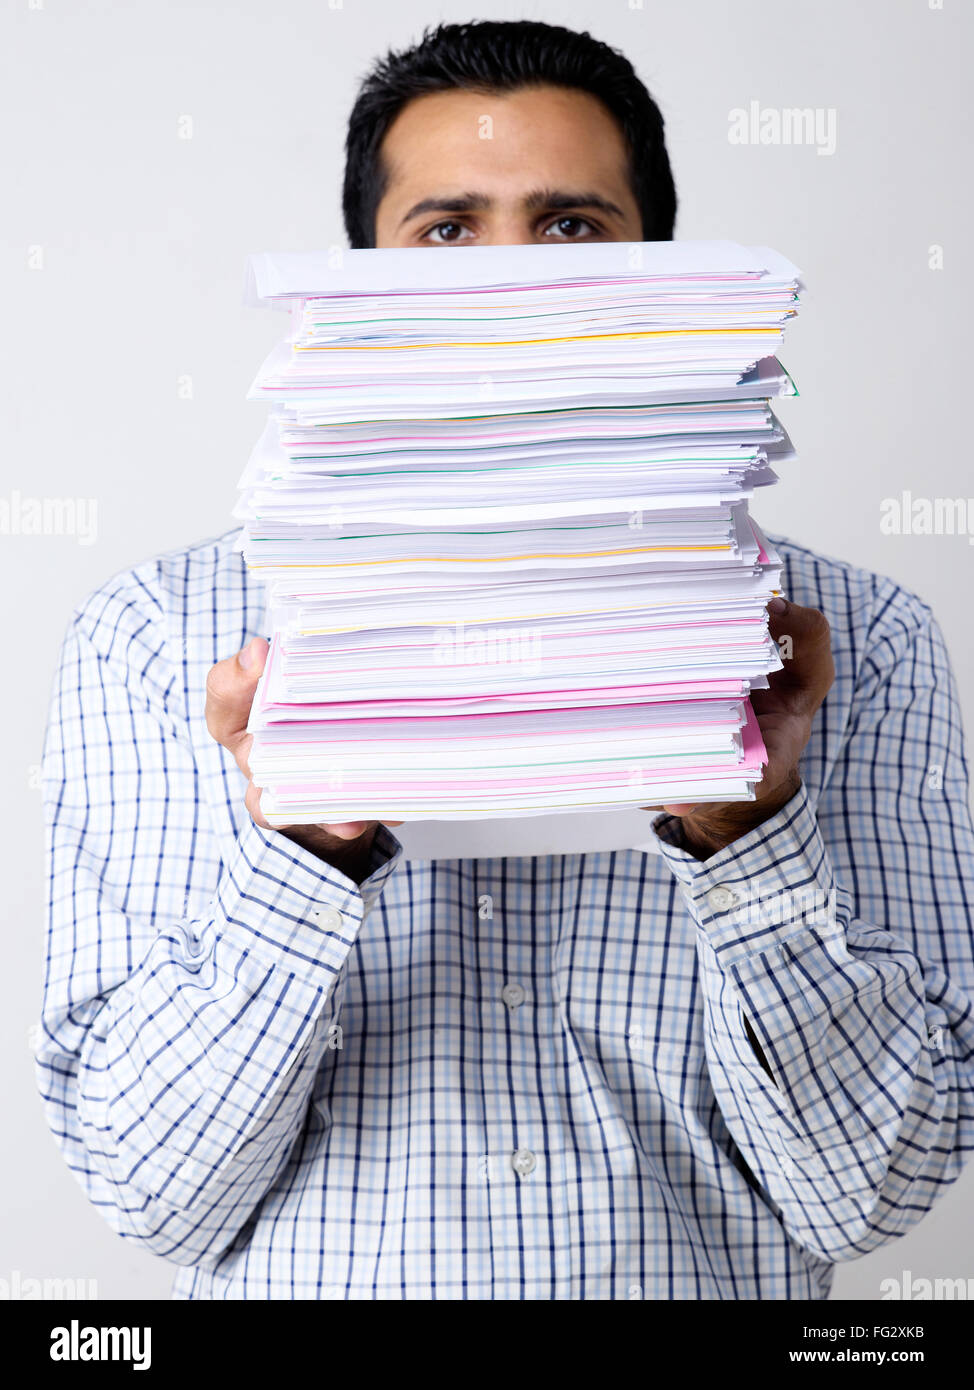 man-behind-stack-of-papers-concept-overwork-backlog-pending-work-busy-FG2XKB.jpg